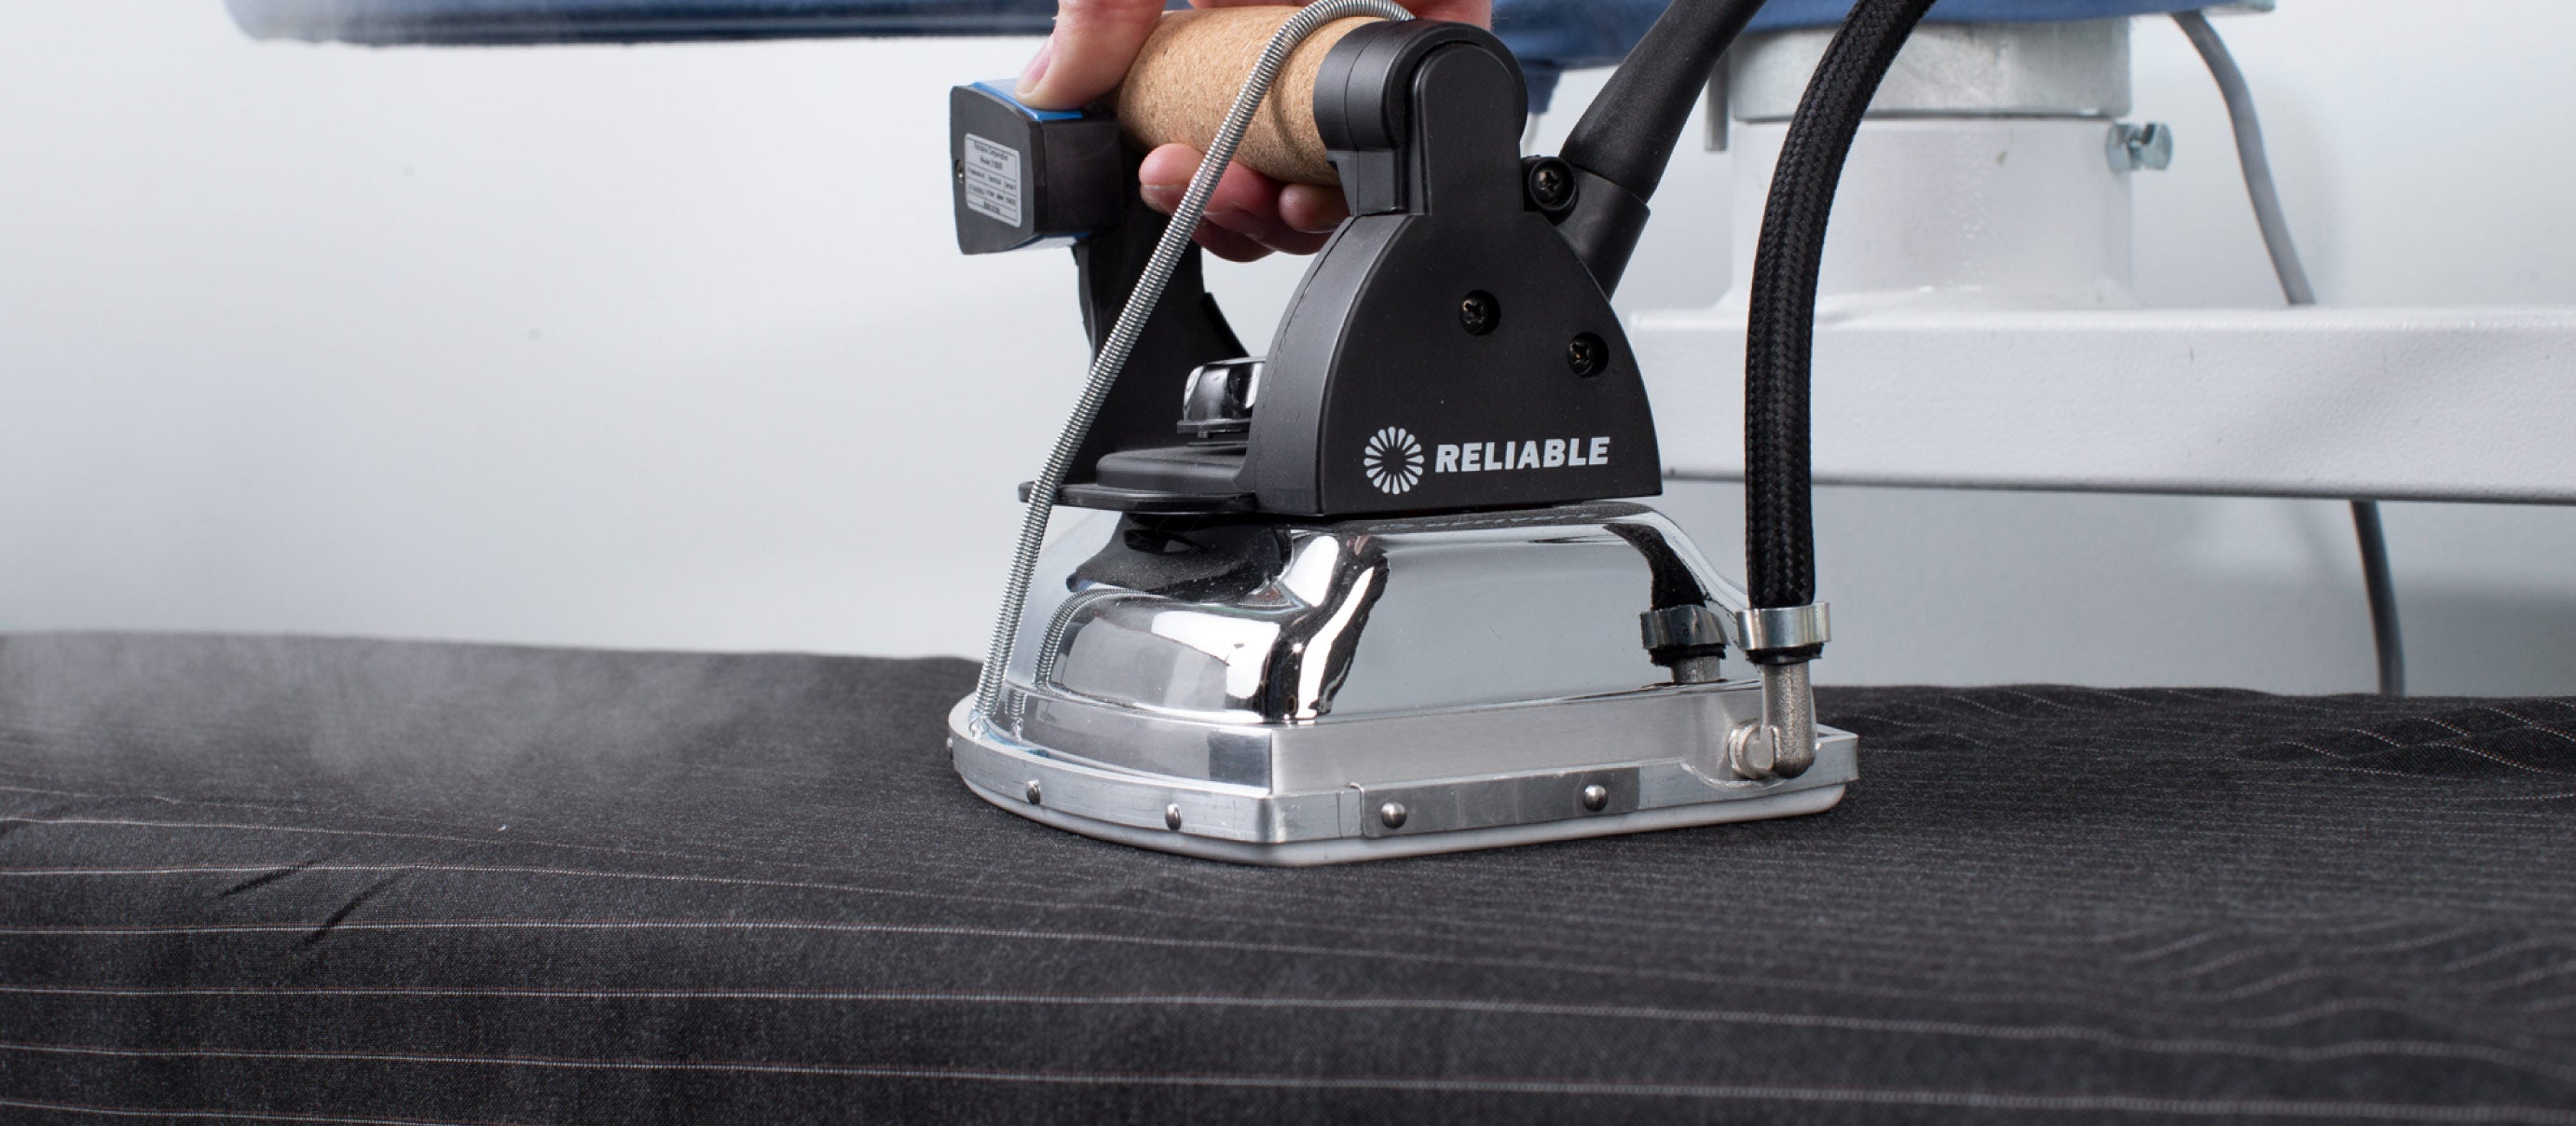 Professional Steam Ironing Stations